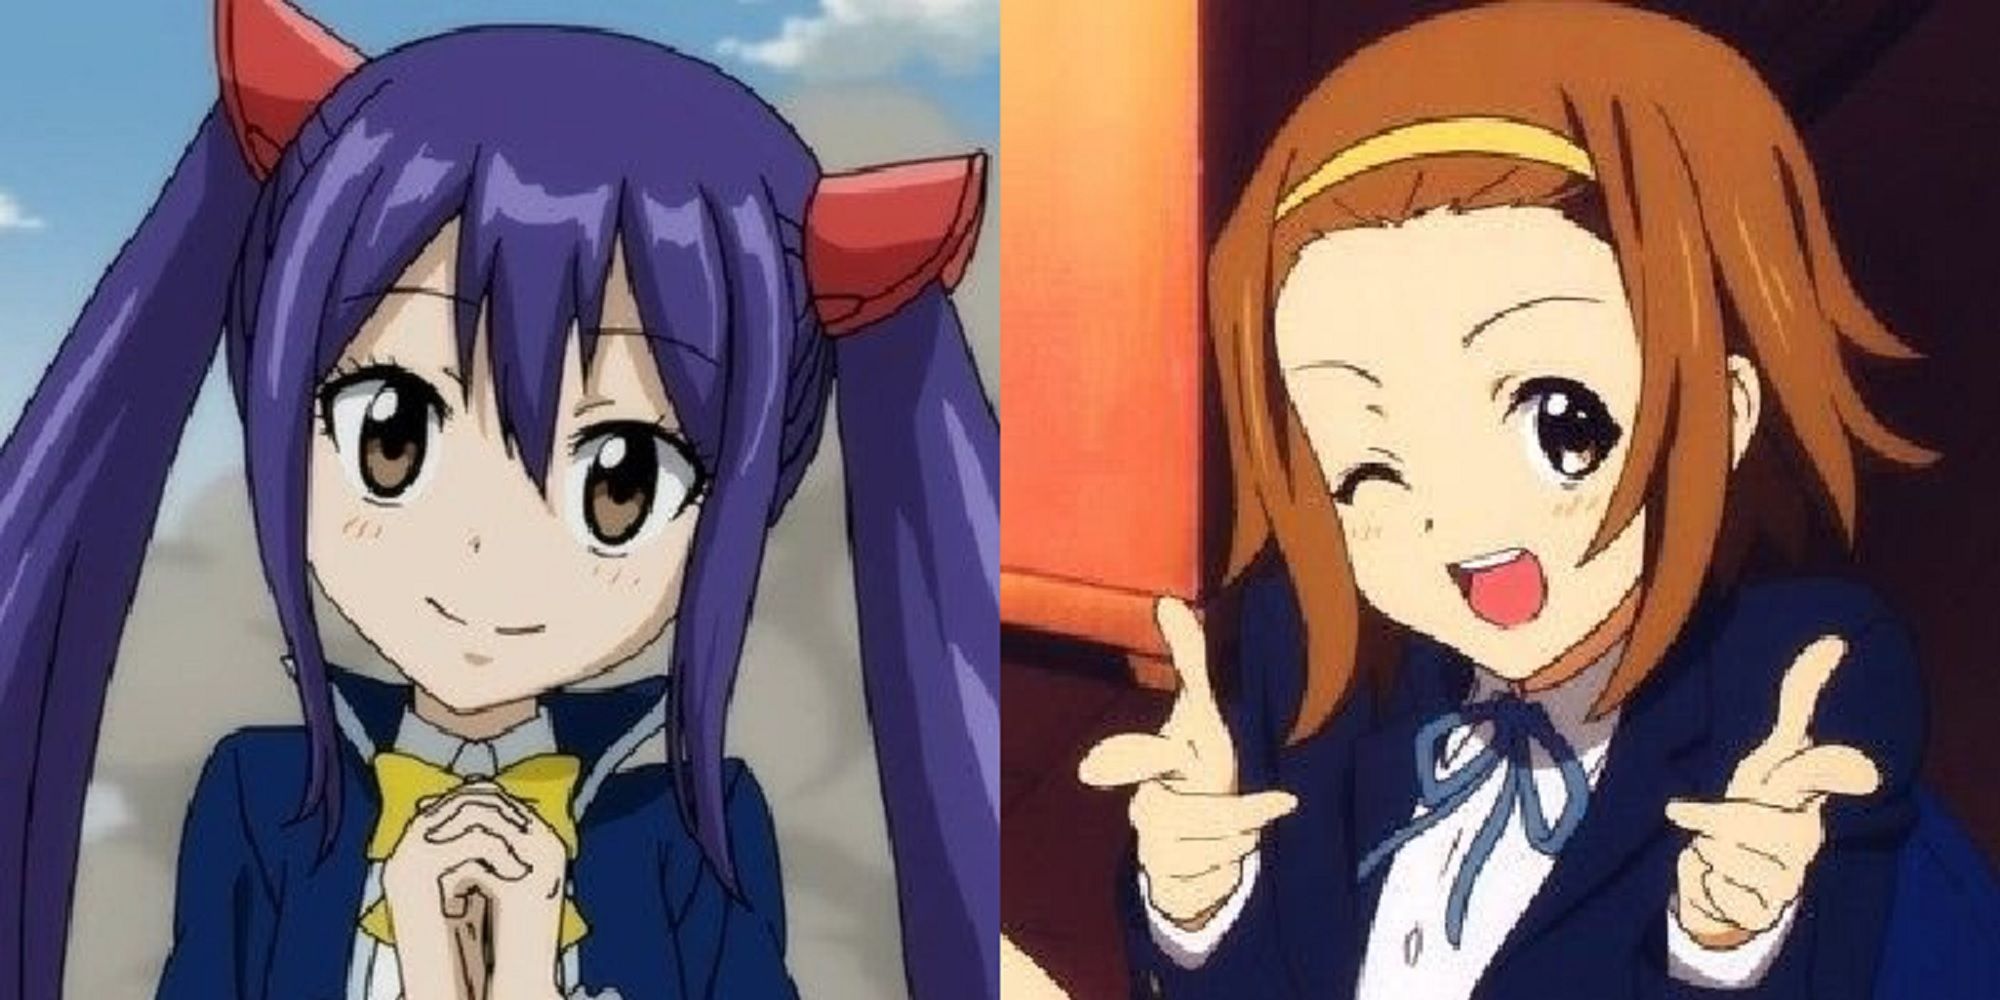 Split image of Wendy Marvell from Fairy Tail and Ritsu Tainaka from K-ON!